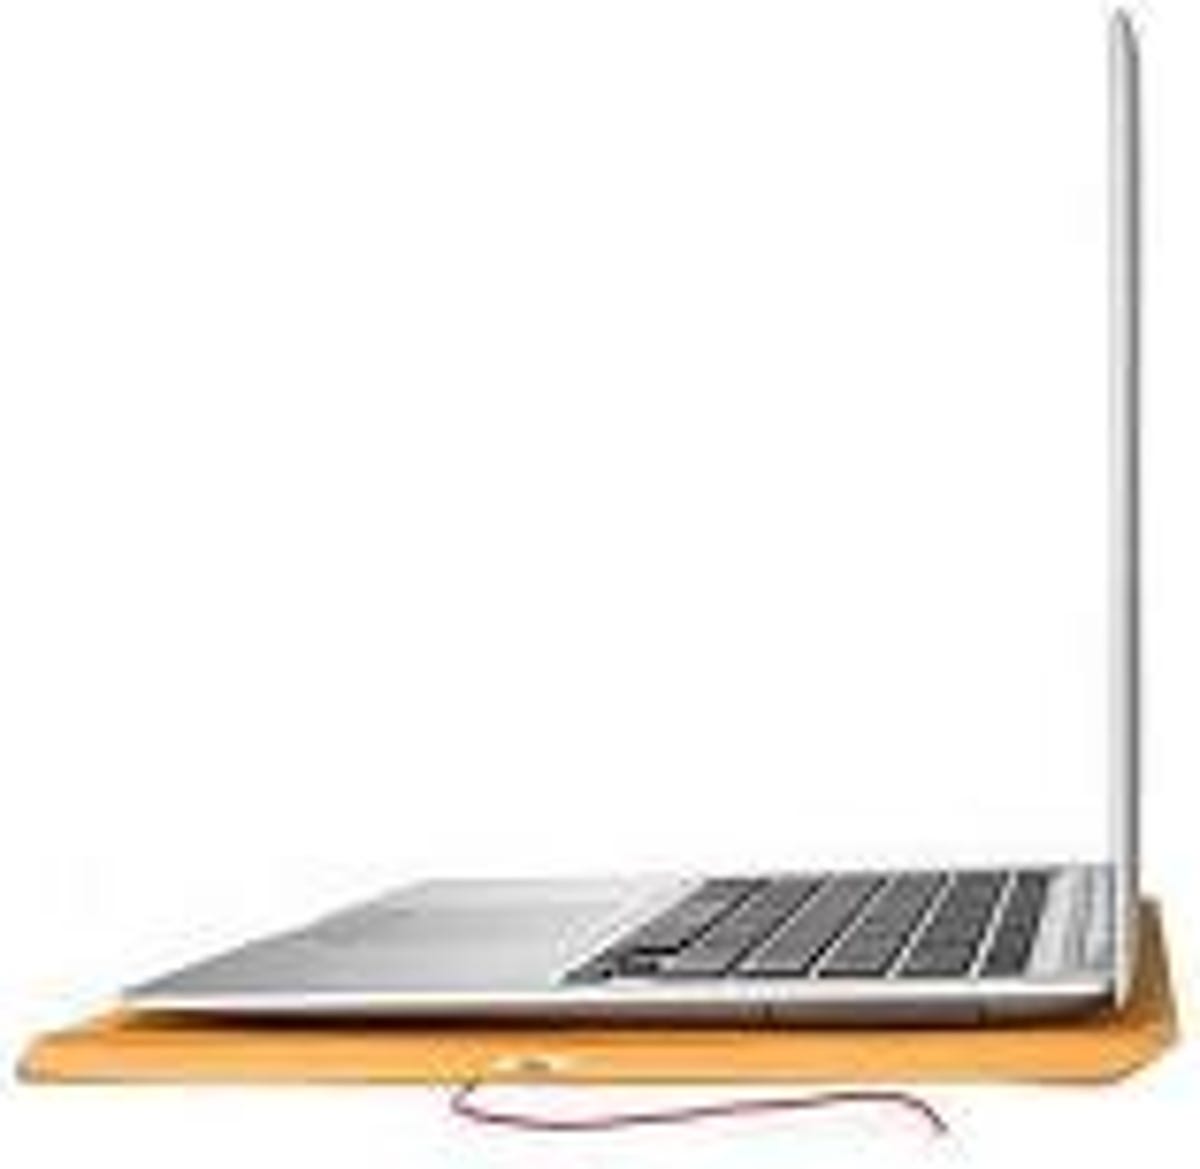 The price of Apple's MacBook Air is less egregious than the others but still exorbitant